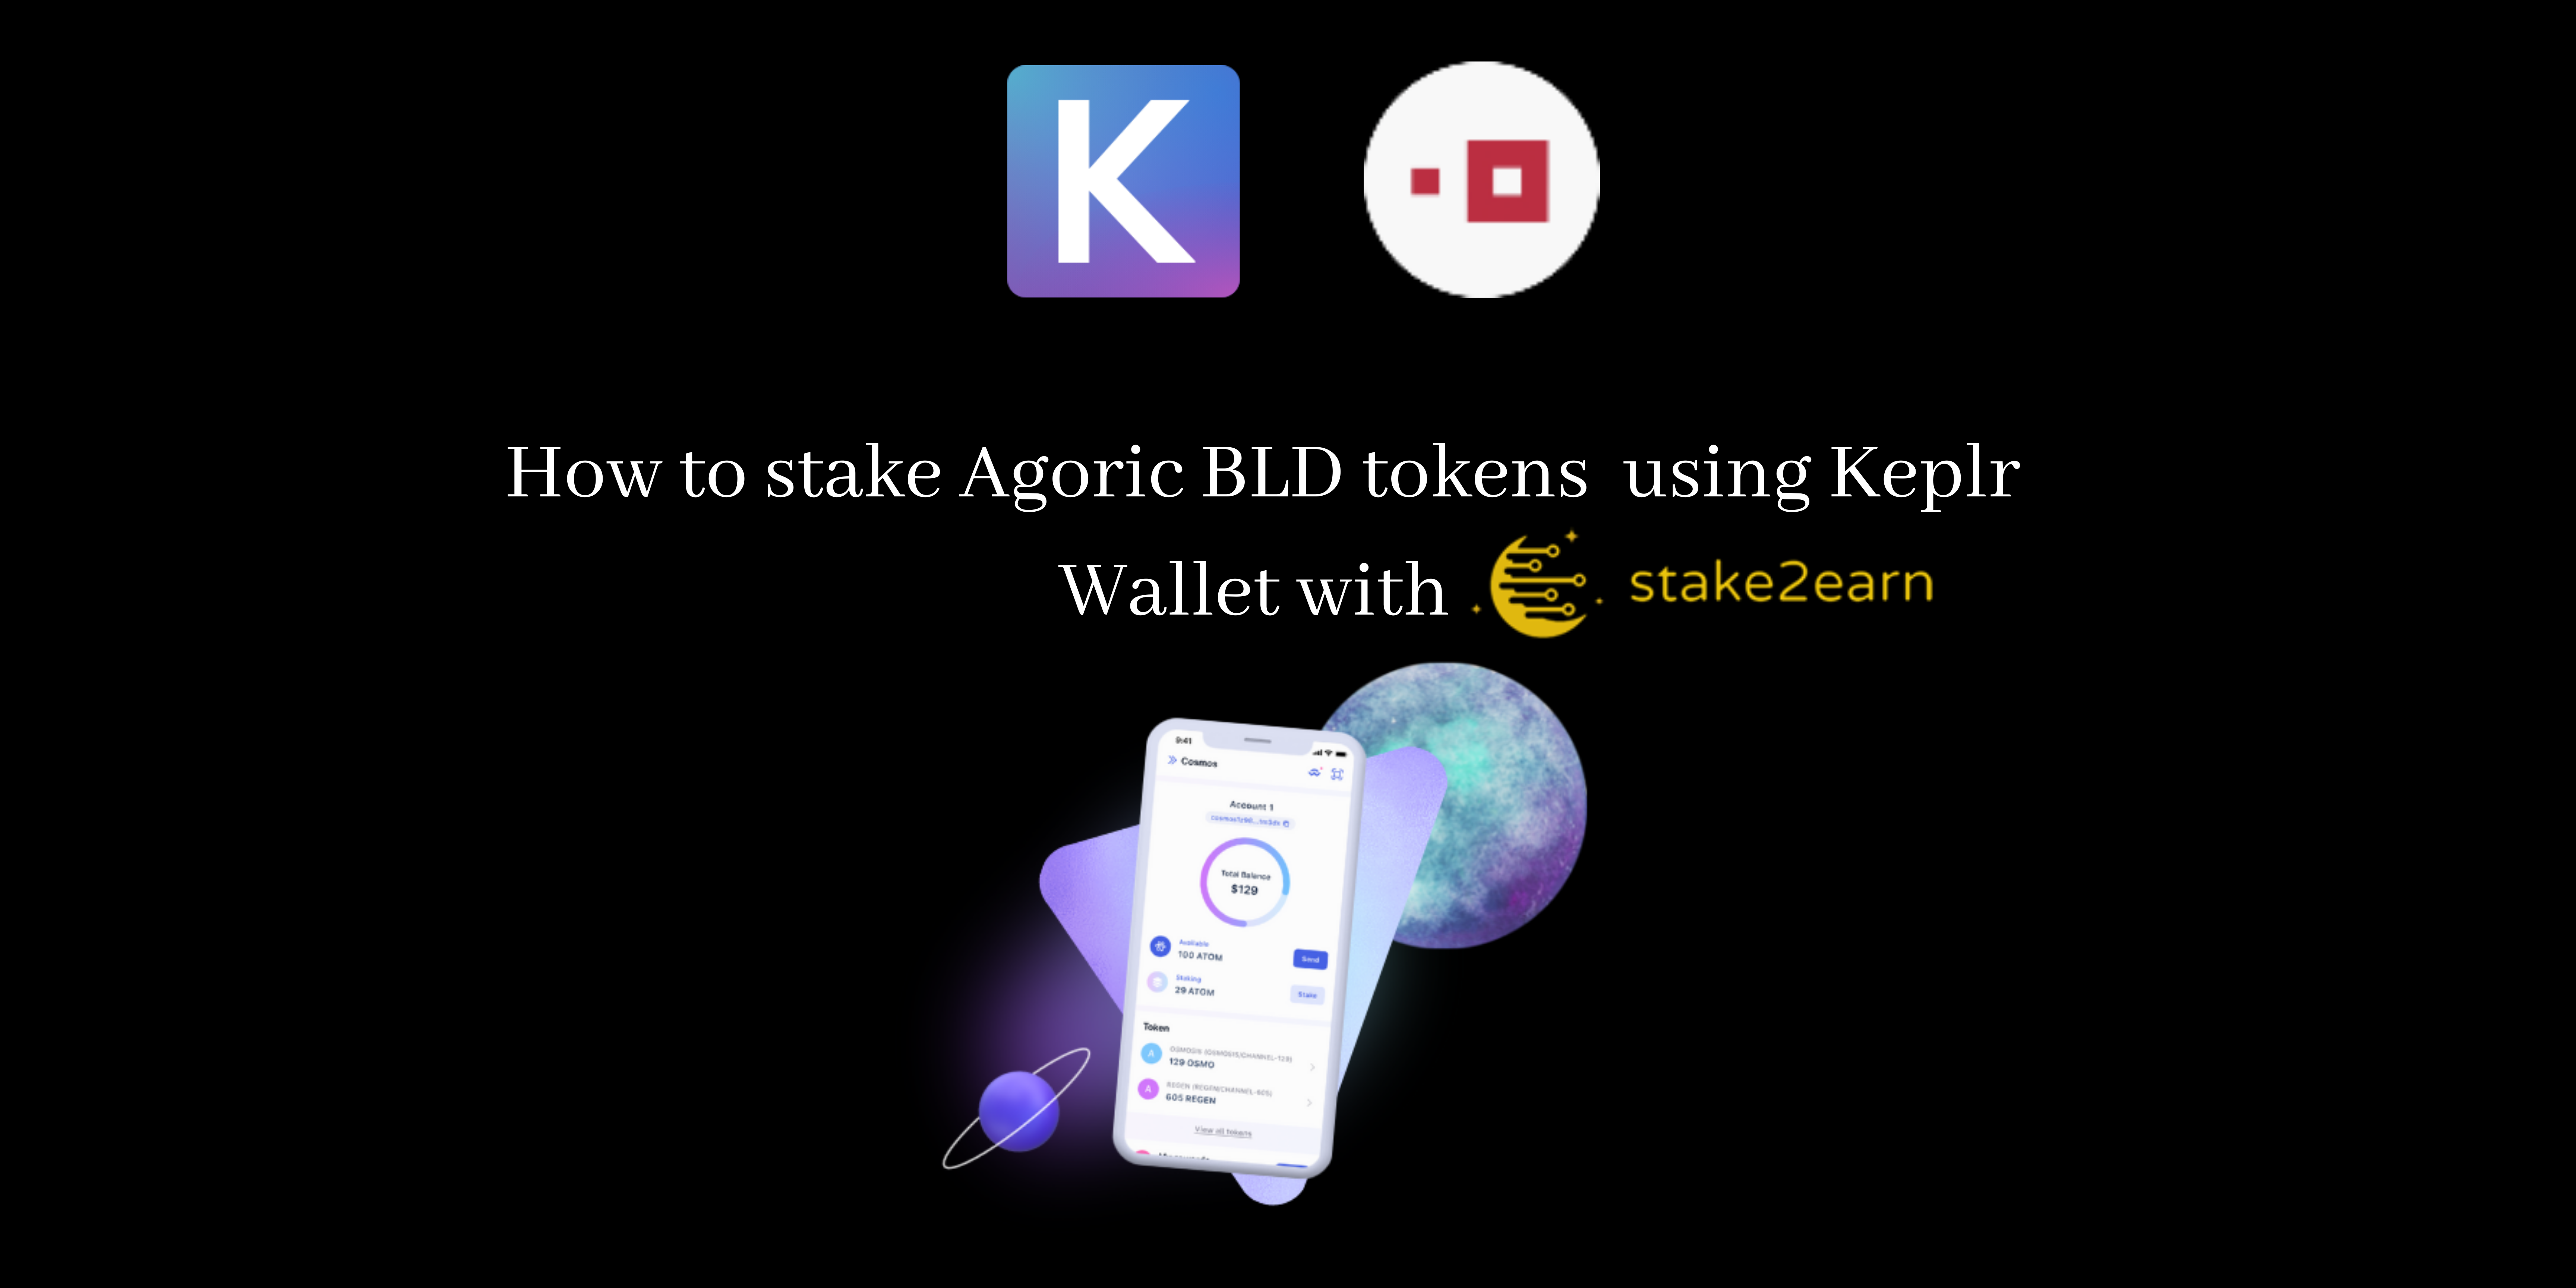 how-to-stake-agoric-bld-with-stake2earn.png